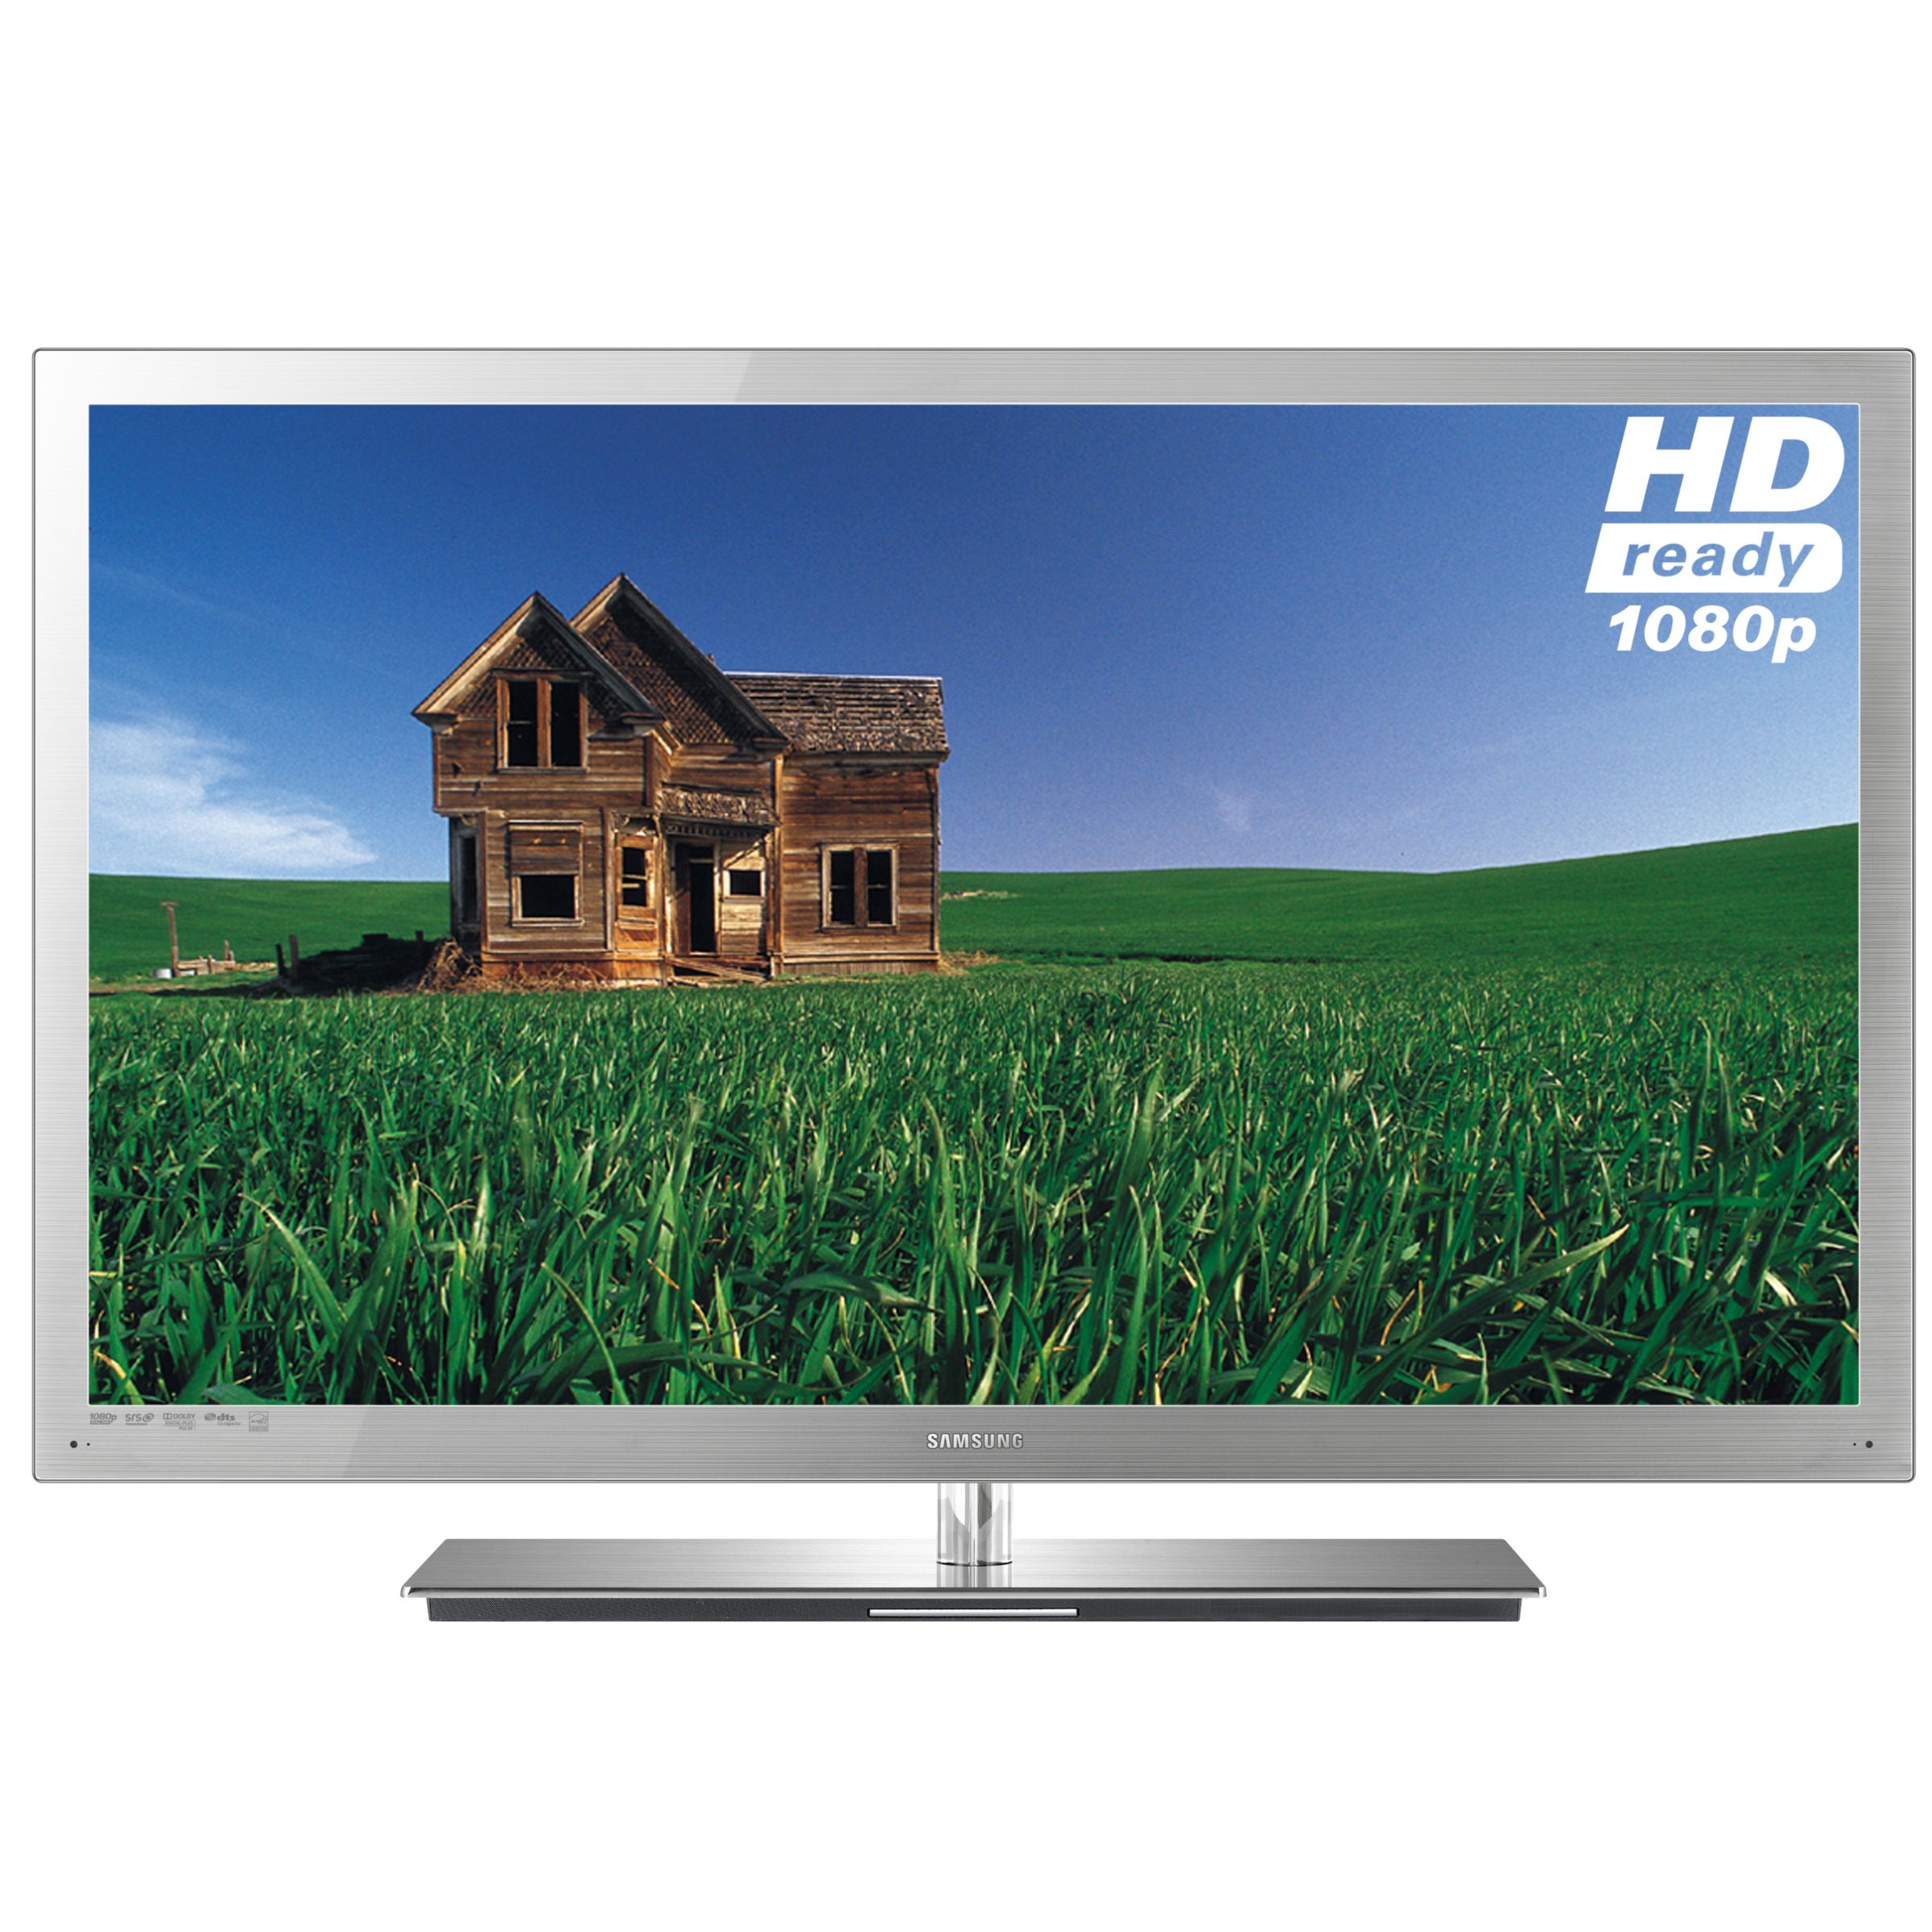 Samsung UE55C9000Z LED HD 1080p 3D Television, 55 Inch with Built-in Freeview HD at John Lewis